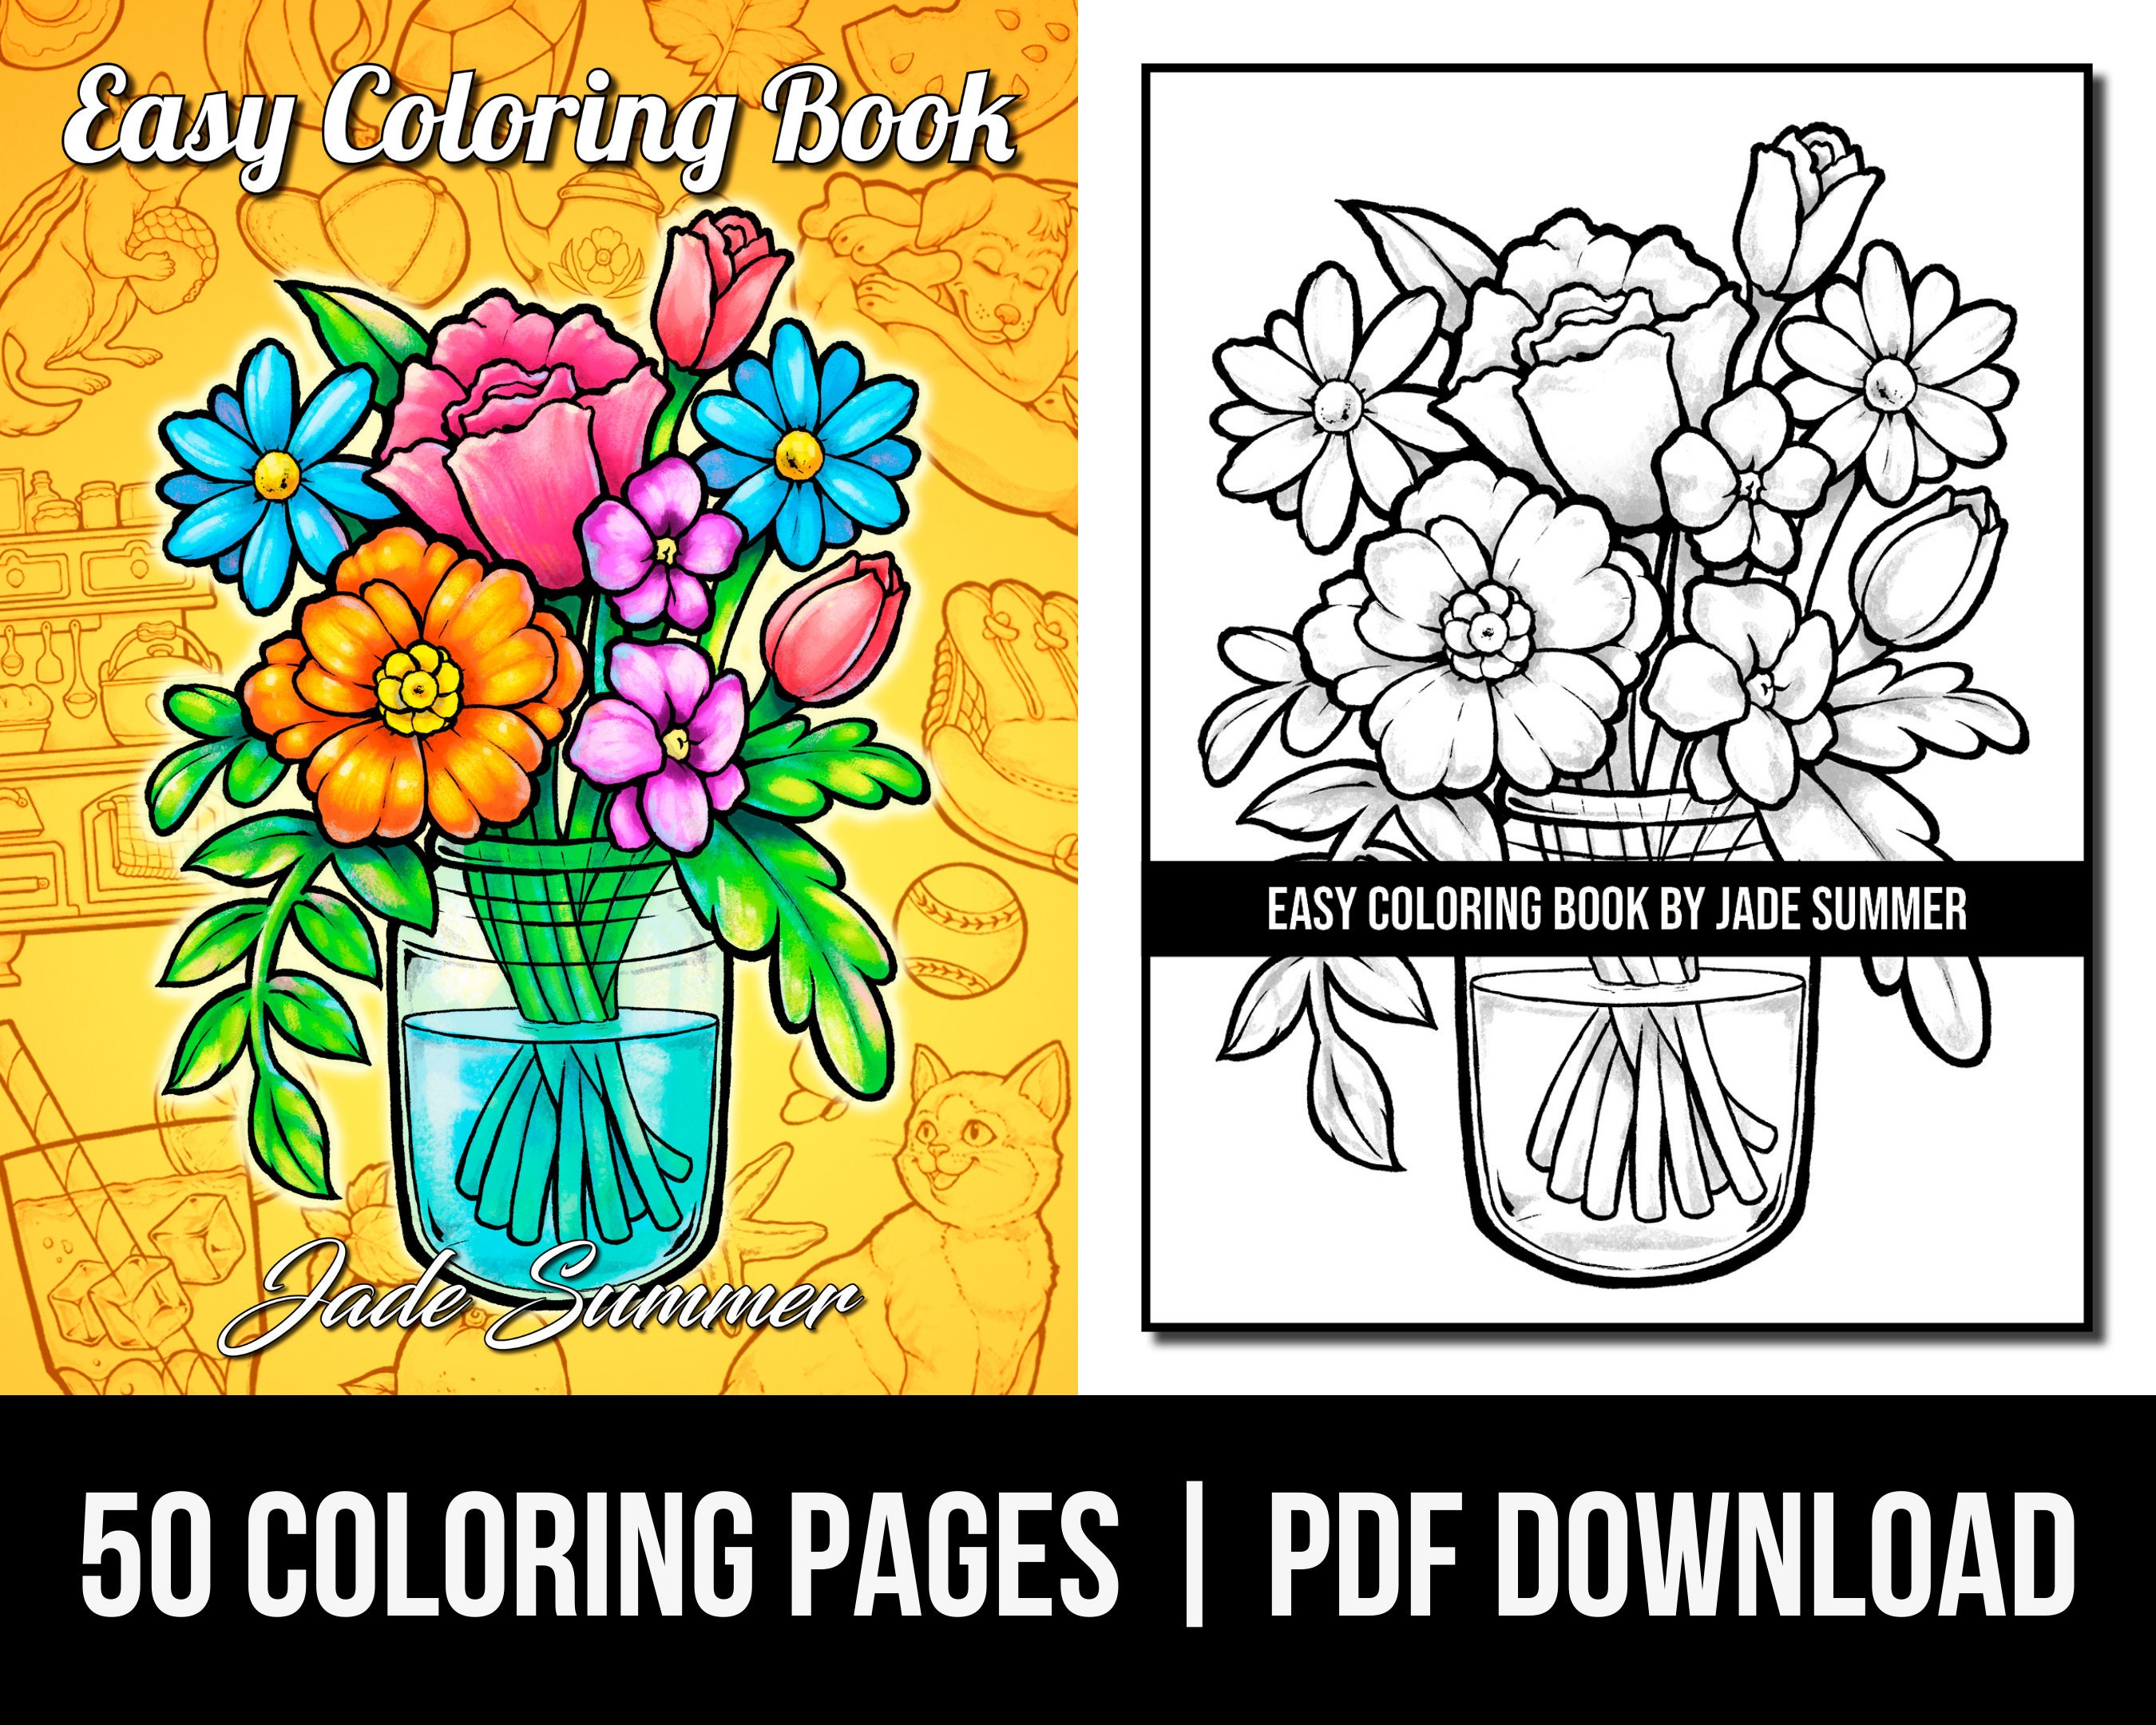 Watercolor Workbook, Adult Coloring Book, How To, Gift for Adults and Kids,  Art Workbook, Step by Step, Painting for Beginners/all Levels 